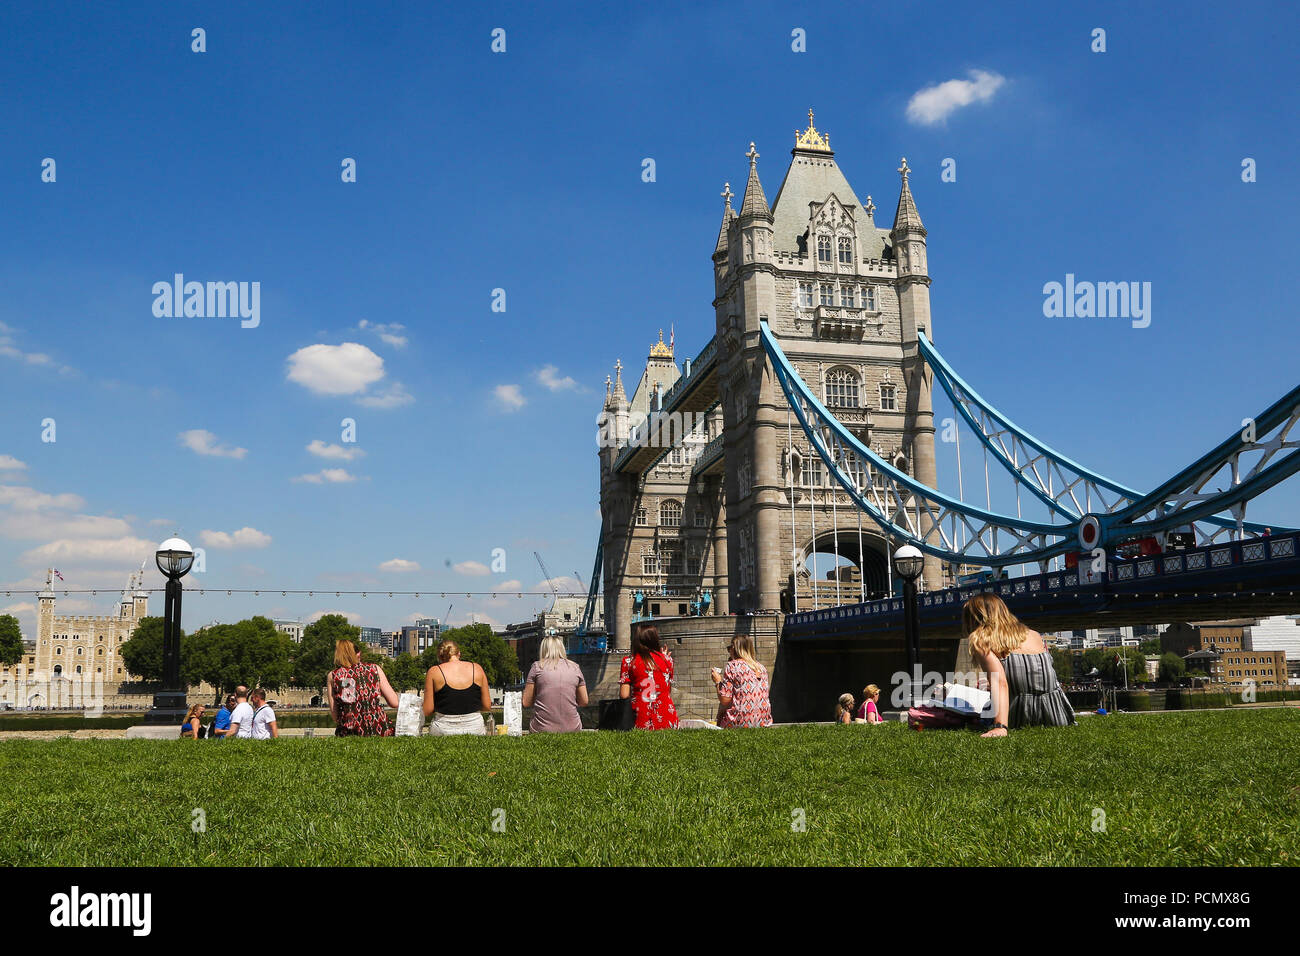 Potters Fields Park. London. UK 3 Aug 2018 - City workers enjoy the sunshine in Potters Fields Park with a view of Tower Bridge on another very hot day in the capital. According to the Met Office the heatwave is to continues in the UK and parts of Europe in coming days with record temperatures expected.  Credit: Dinendra Haria/Alamy Live News Stock Photo